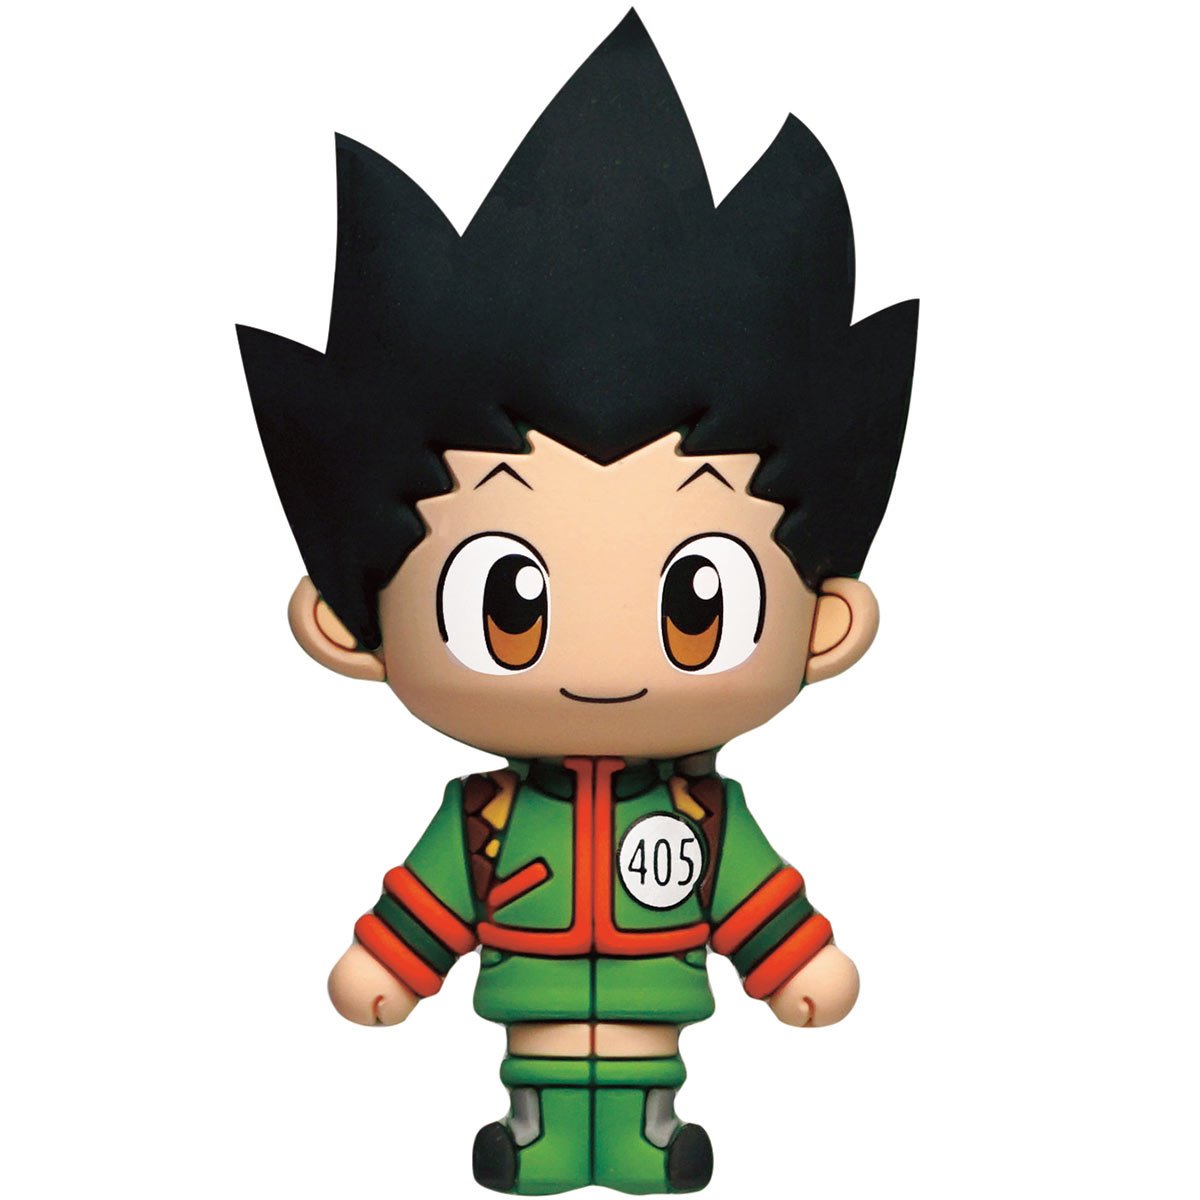 Comparison: Tanjiro from Demon Slayer and Gon from Hunter X Hunter